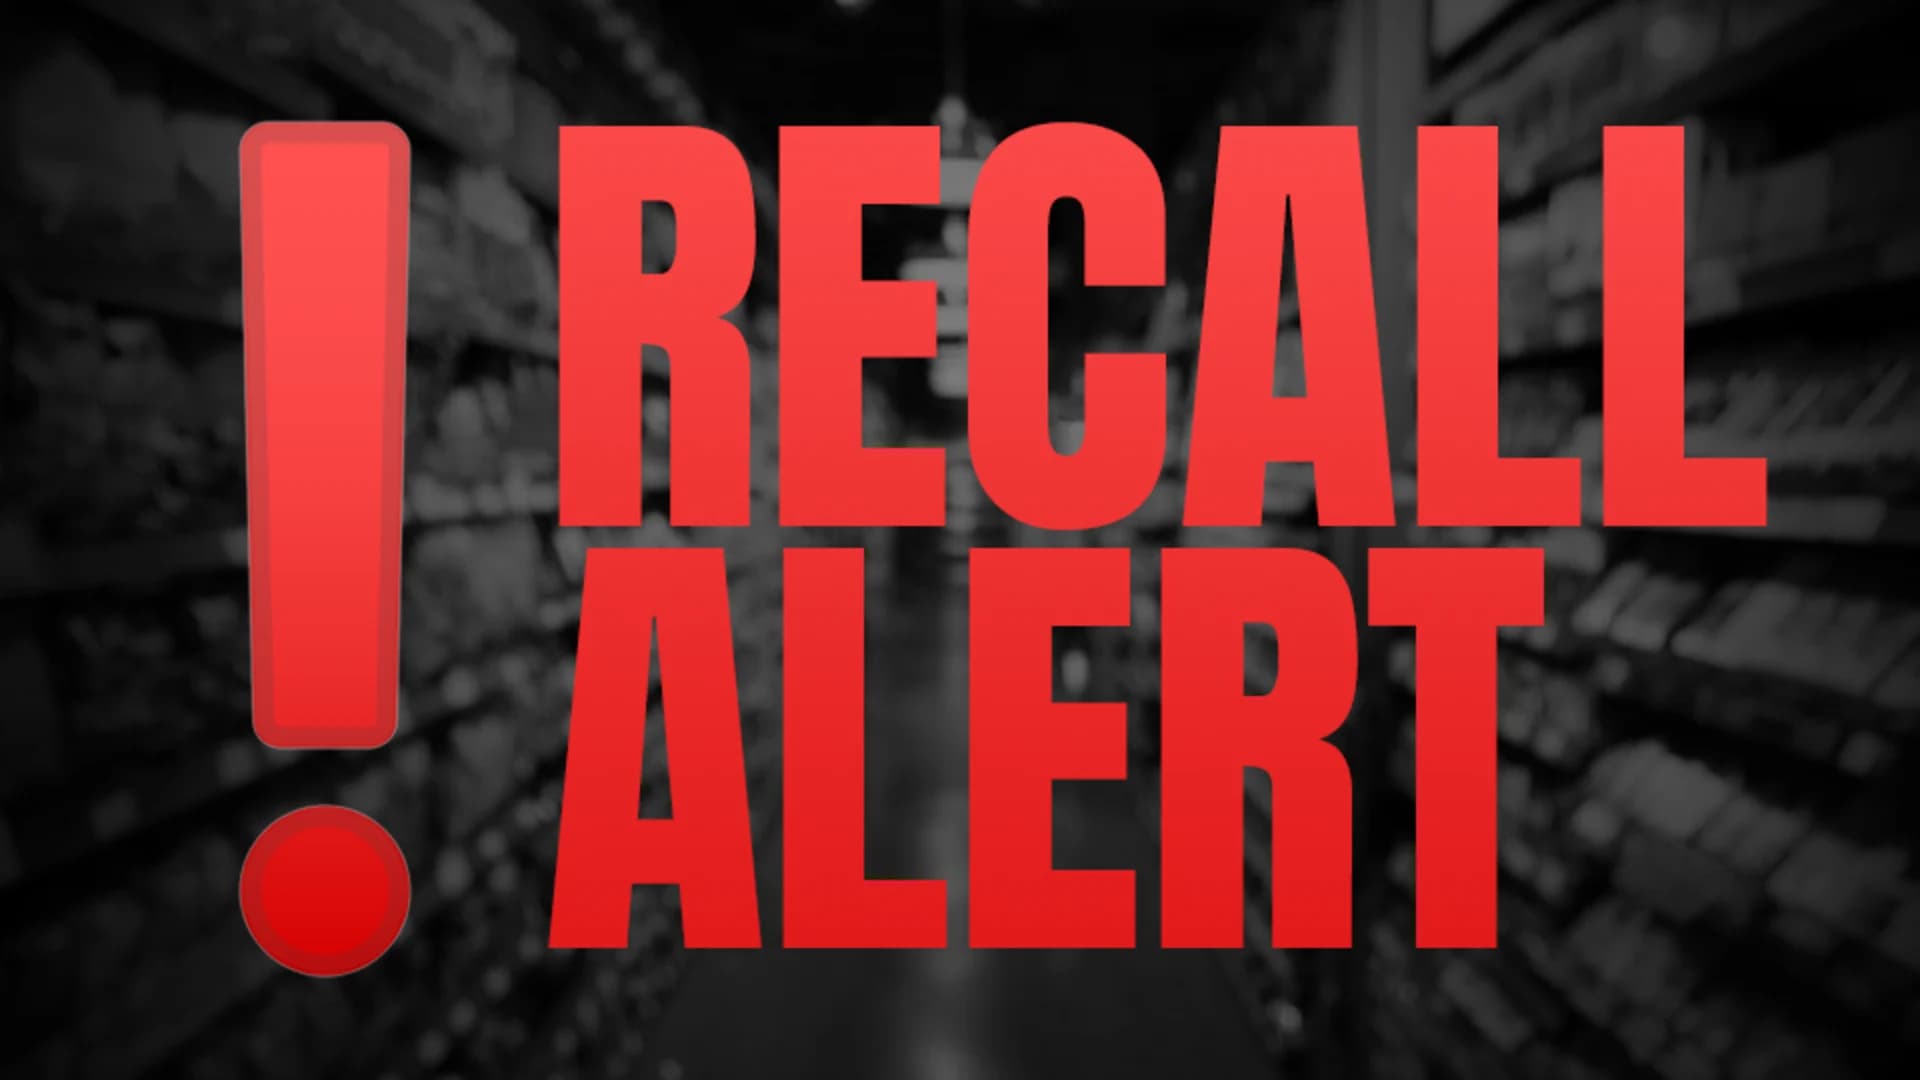 More than 62,000 pounds of beef products recalled for possible E. coli contamination